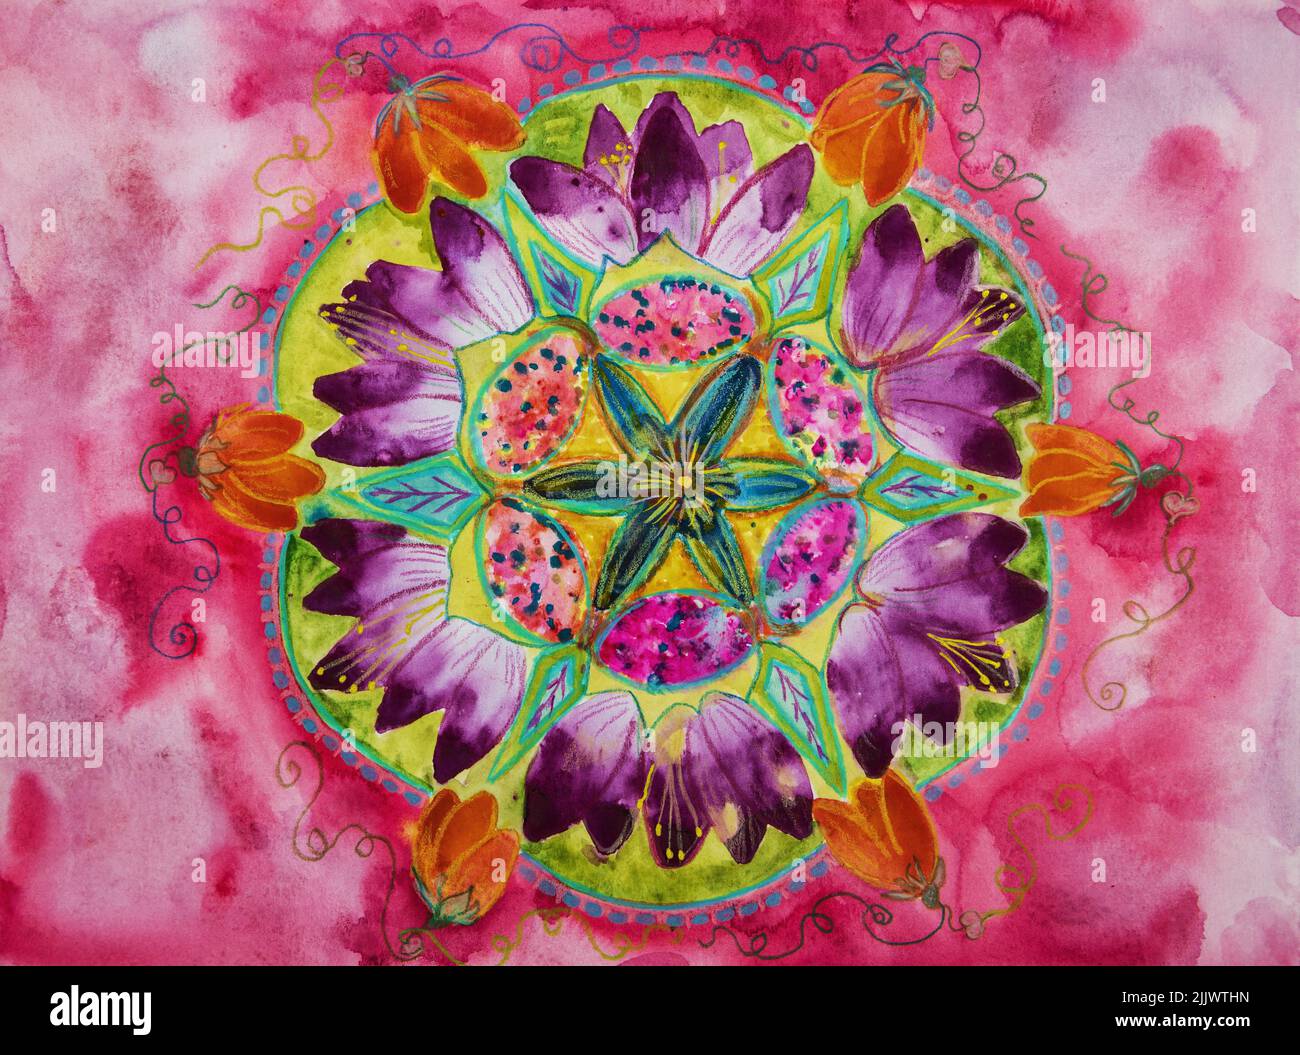 Mandala with flowers. The dabbing technique near the edges gives a soft focus effect due to the altered surface roughness of the paper. Stock Photo